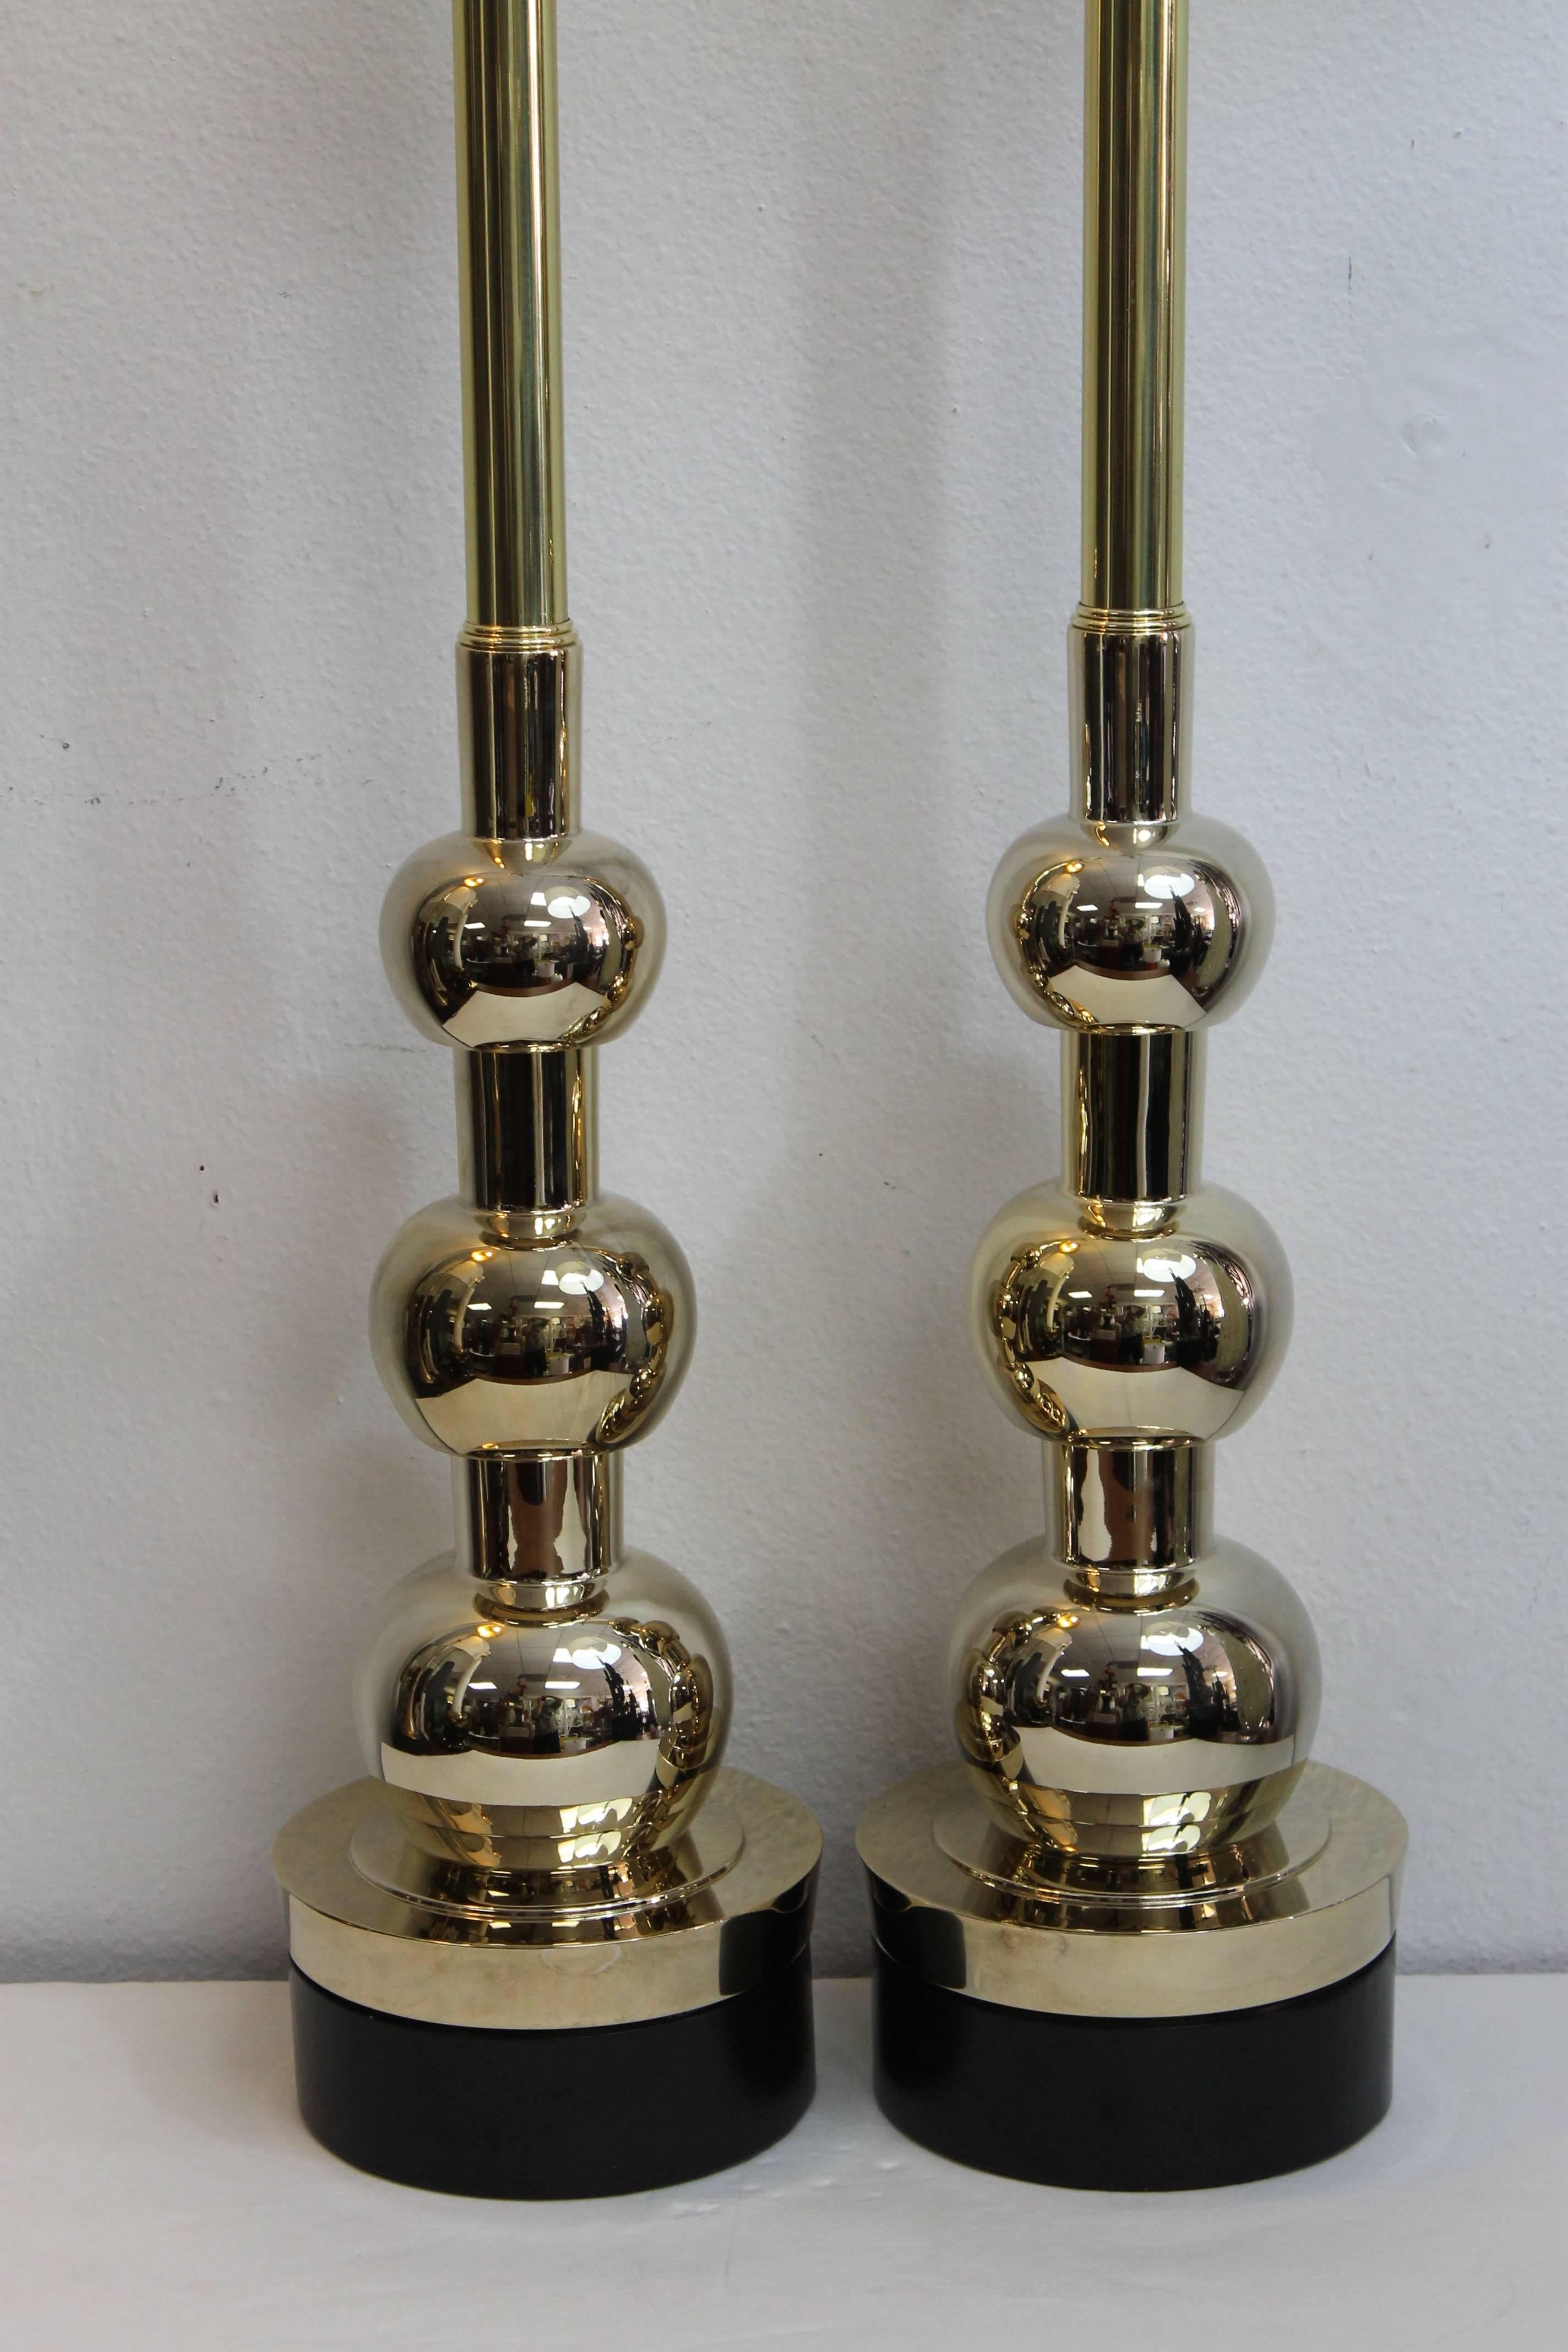 Sculptural pair of Stiffel table lamps in a bronze, brass finish. Lamps were originally a dull chrome and we decided to updated them. The neck is original brass which was polished. The remainder was re-brassed/bronzed. Wood base has been repainted